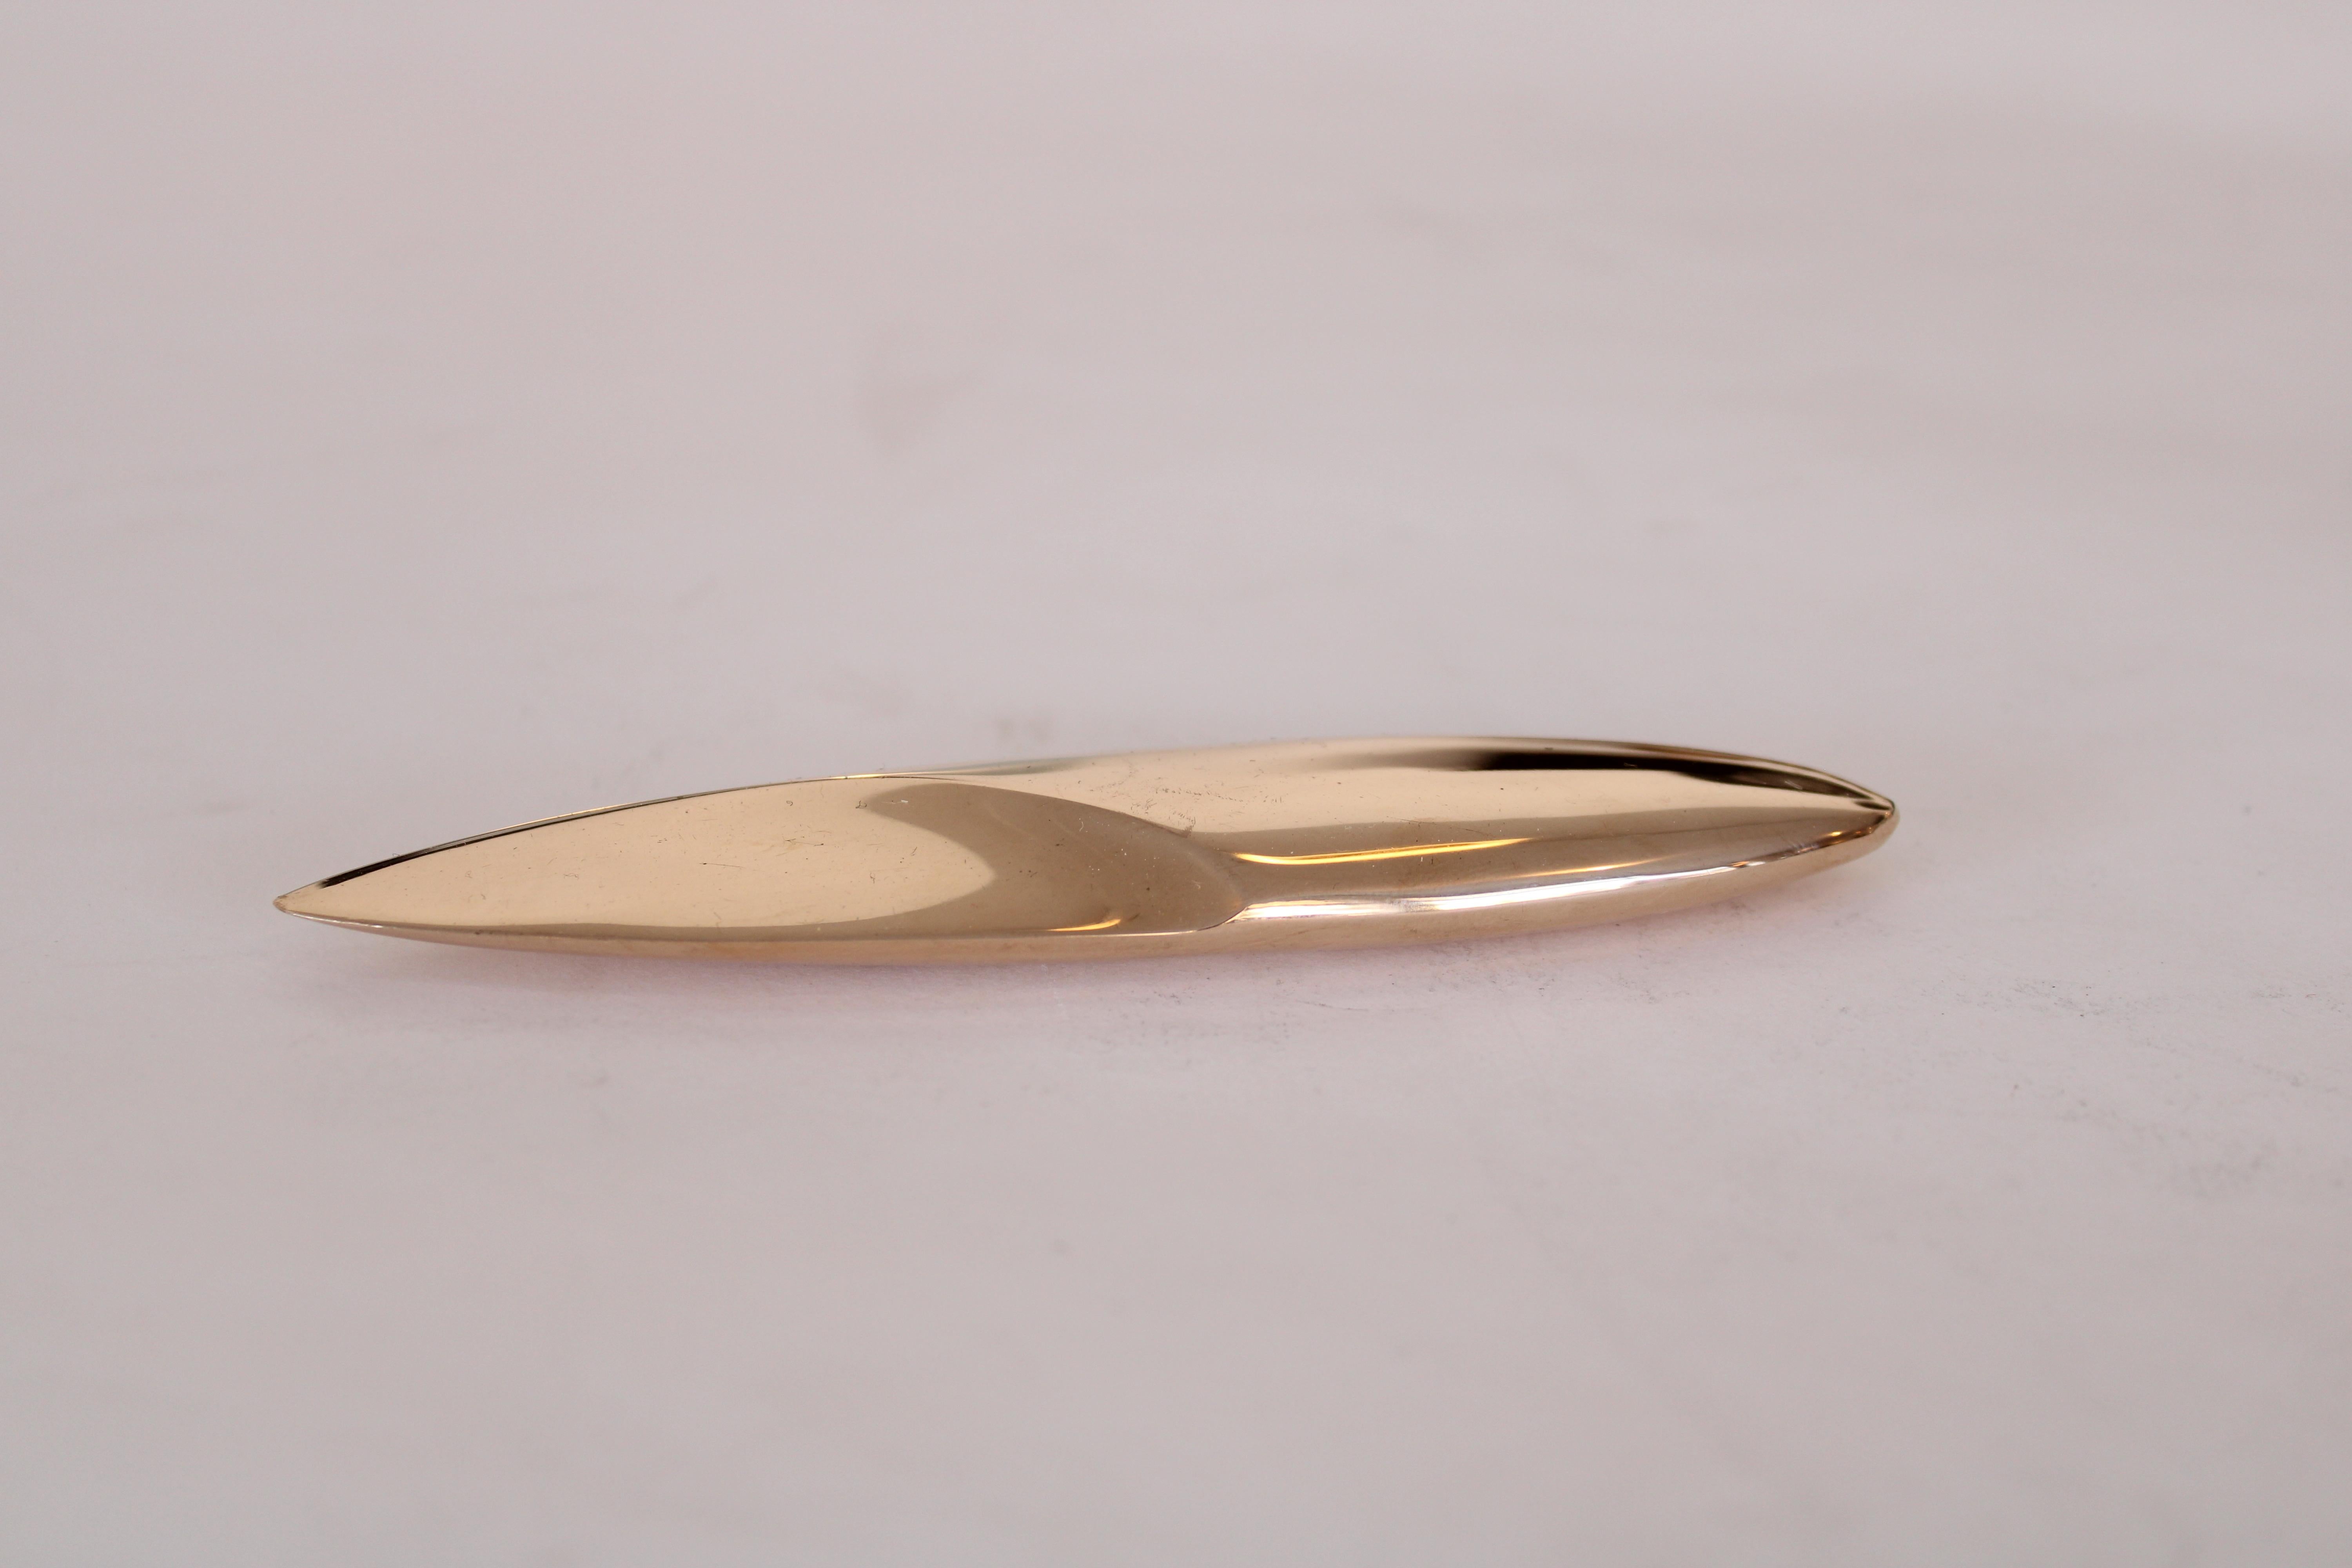 Monique Gerber French bronze cast letter opener in a very sculptural and minimalist form. Designed Monique Gerber. 
Can be used as a sculptural object or paper weight as well.
Reminiscent of a Brancusi form. 
Signed MG France.
It is rare to have the